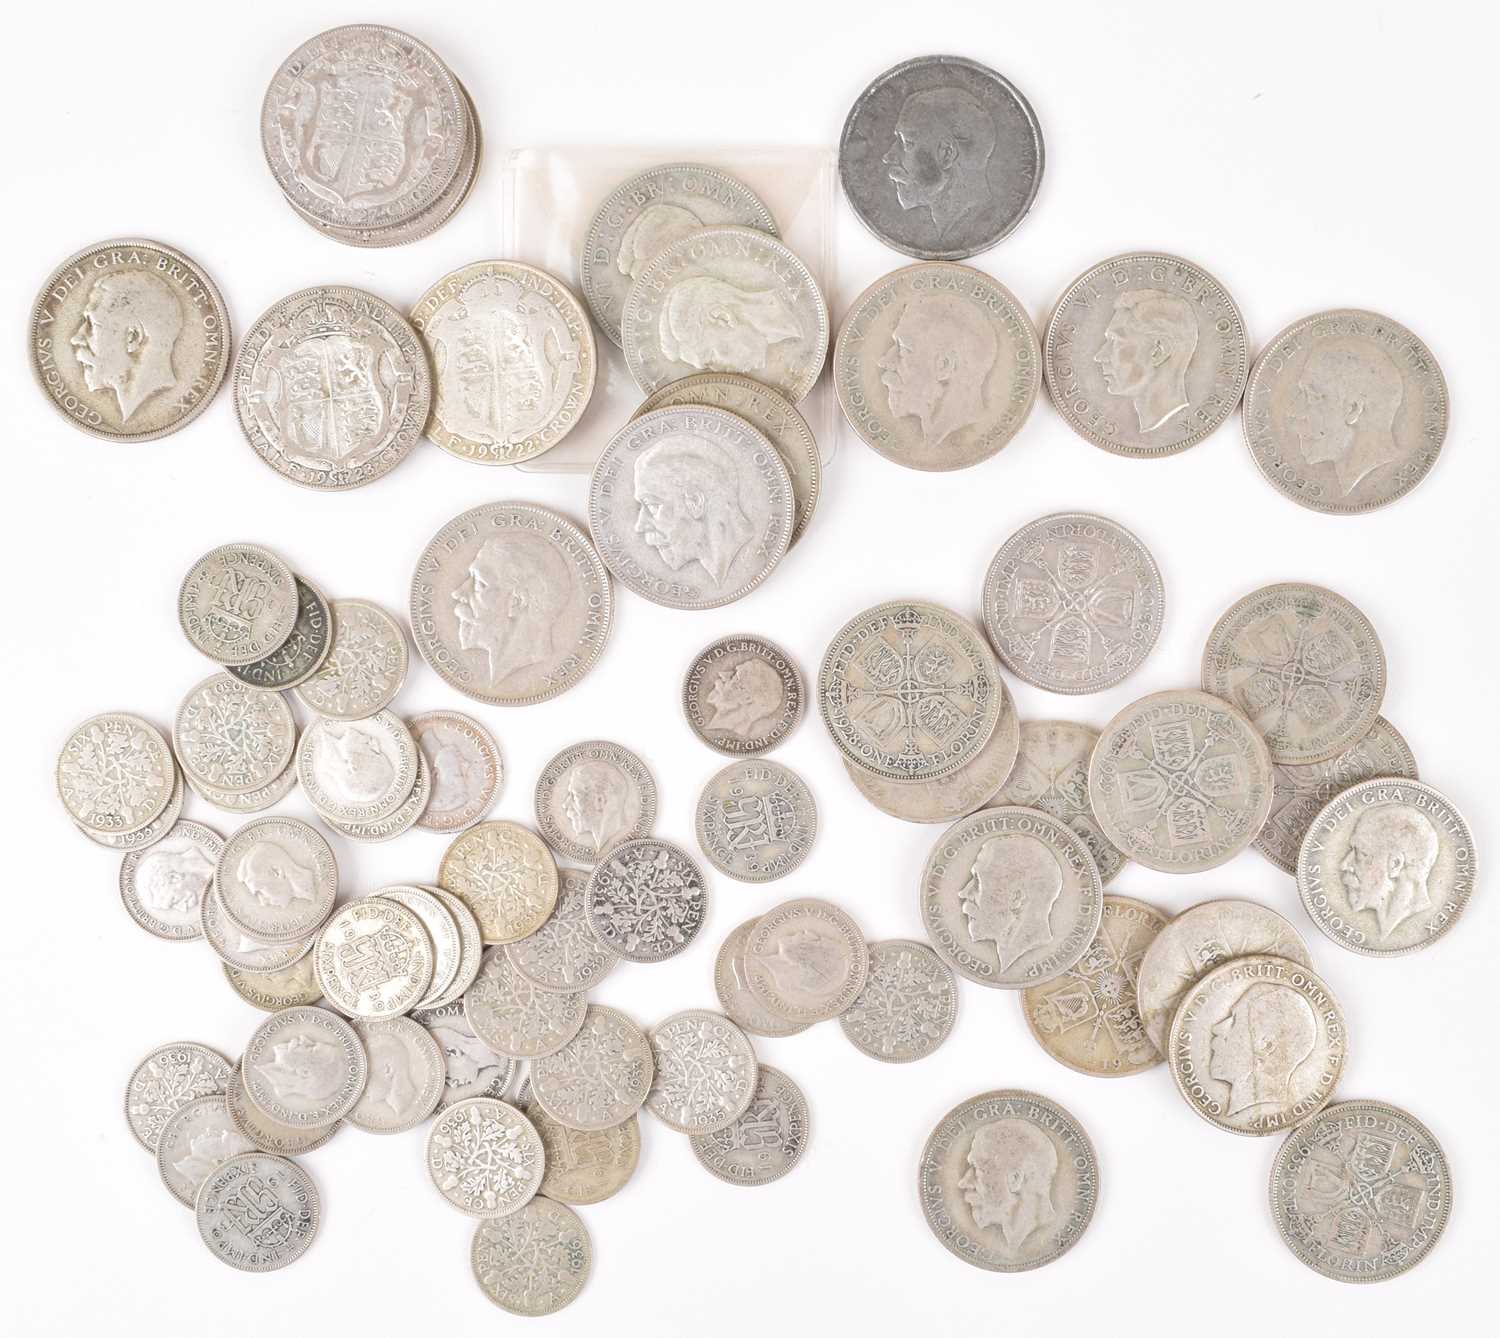 Lot 4 - Assortment of various debased silver British coinage (approx. 1283g).